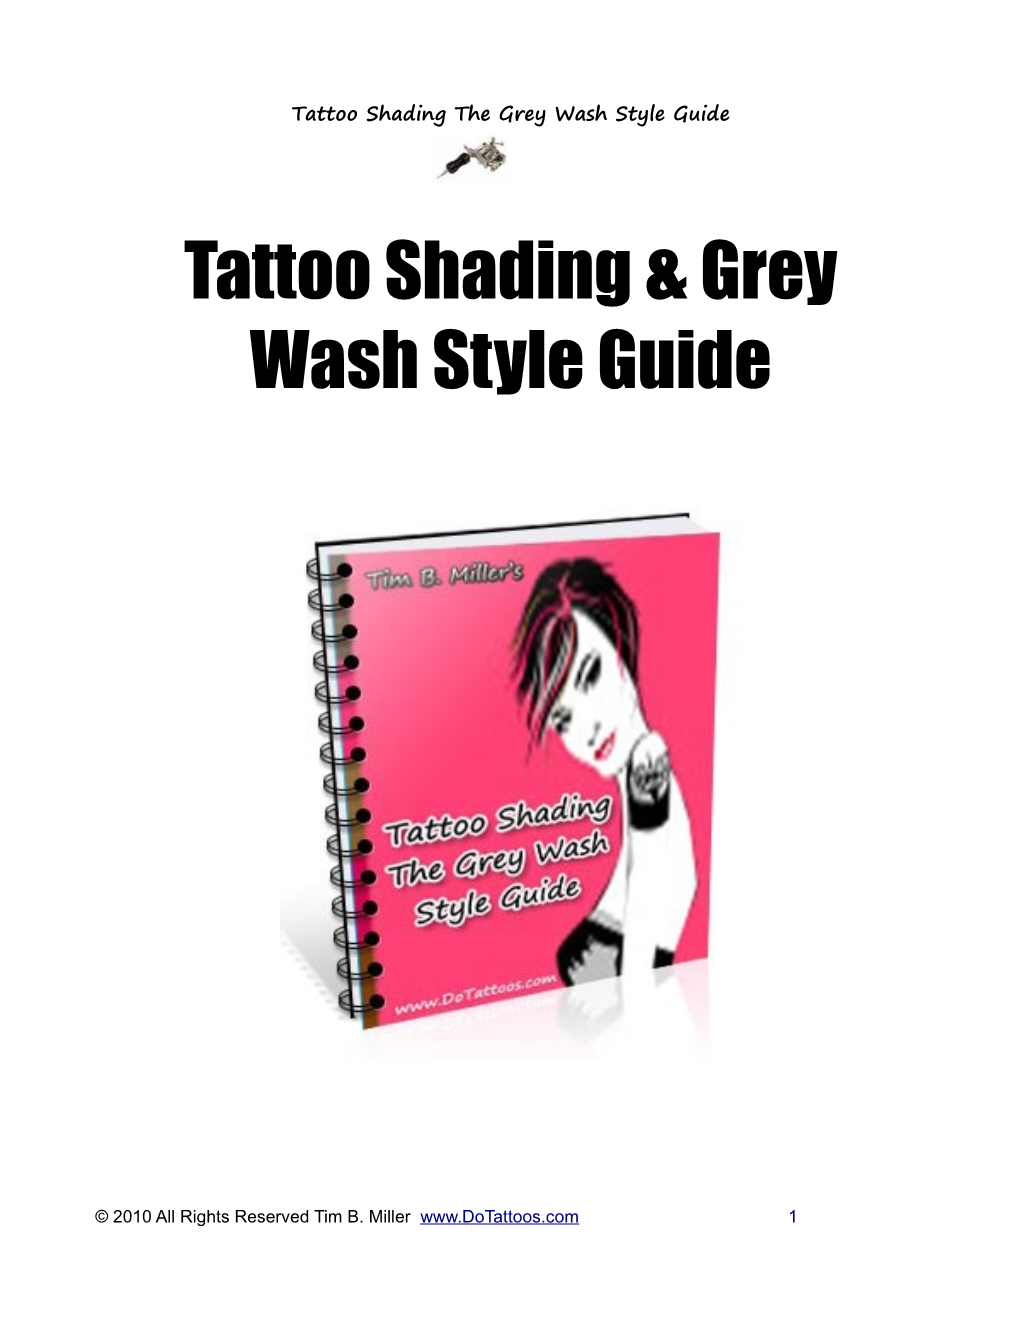 Tattoo Shading & Grey Wash Style Guide